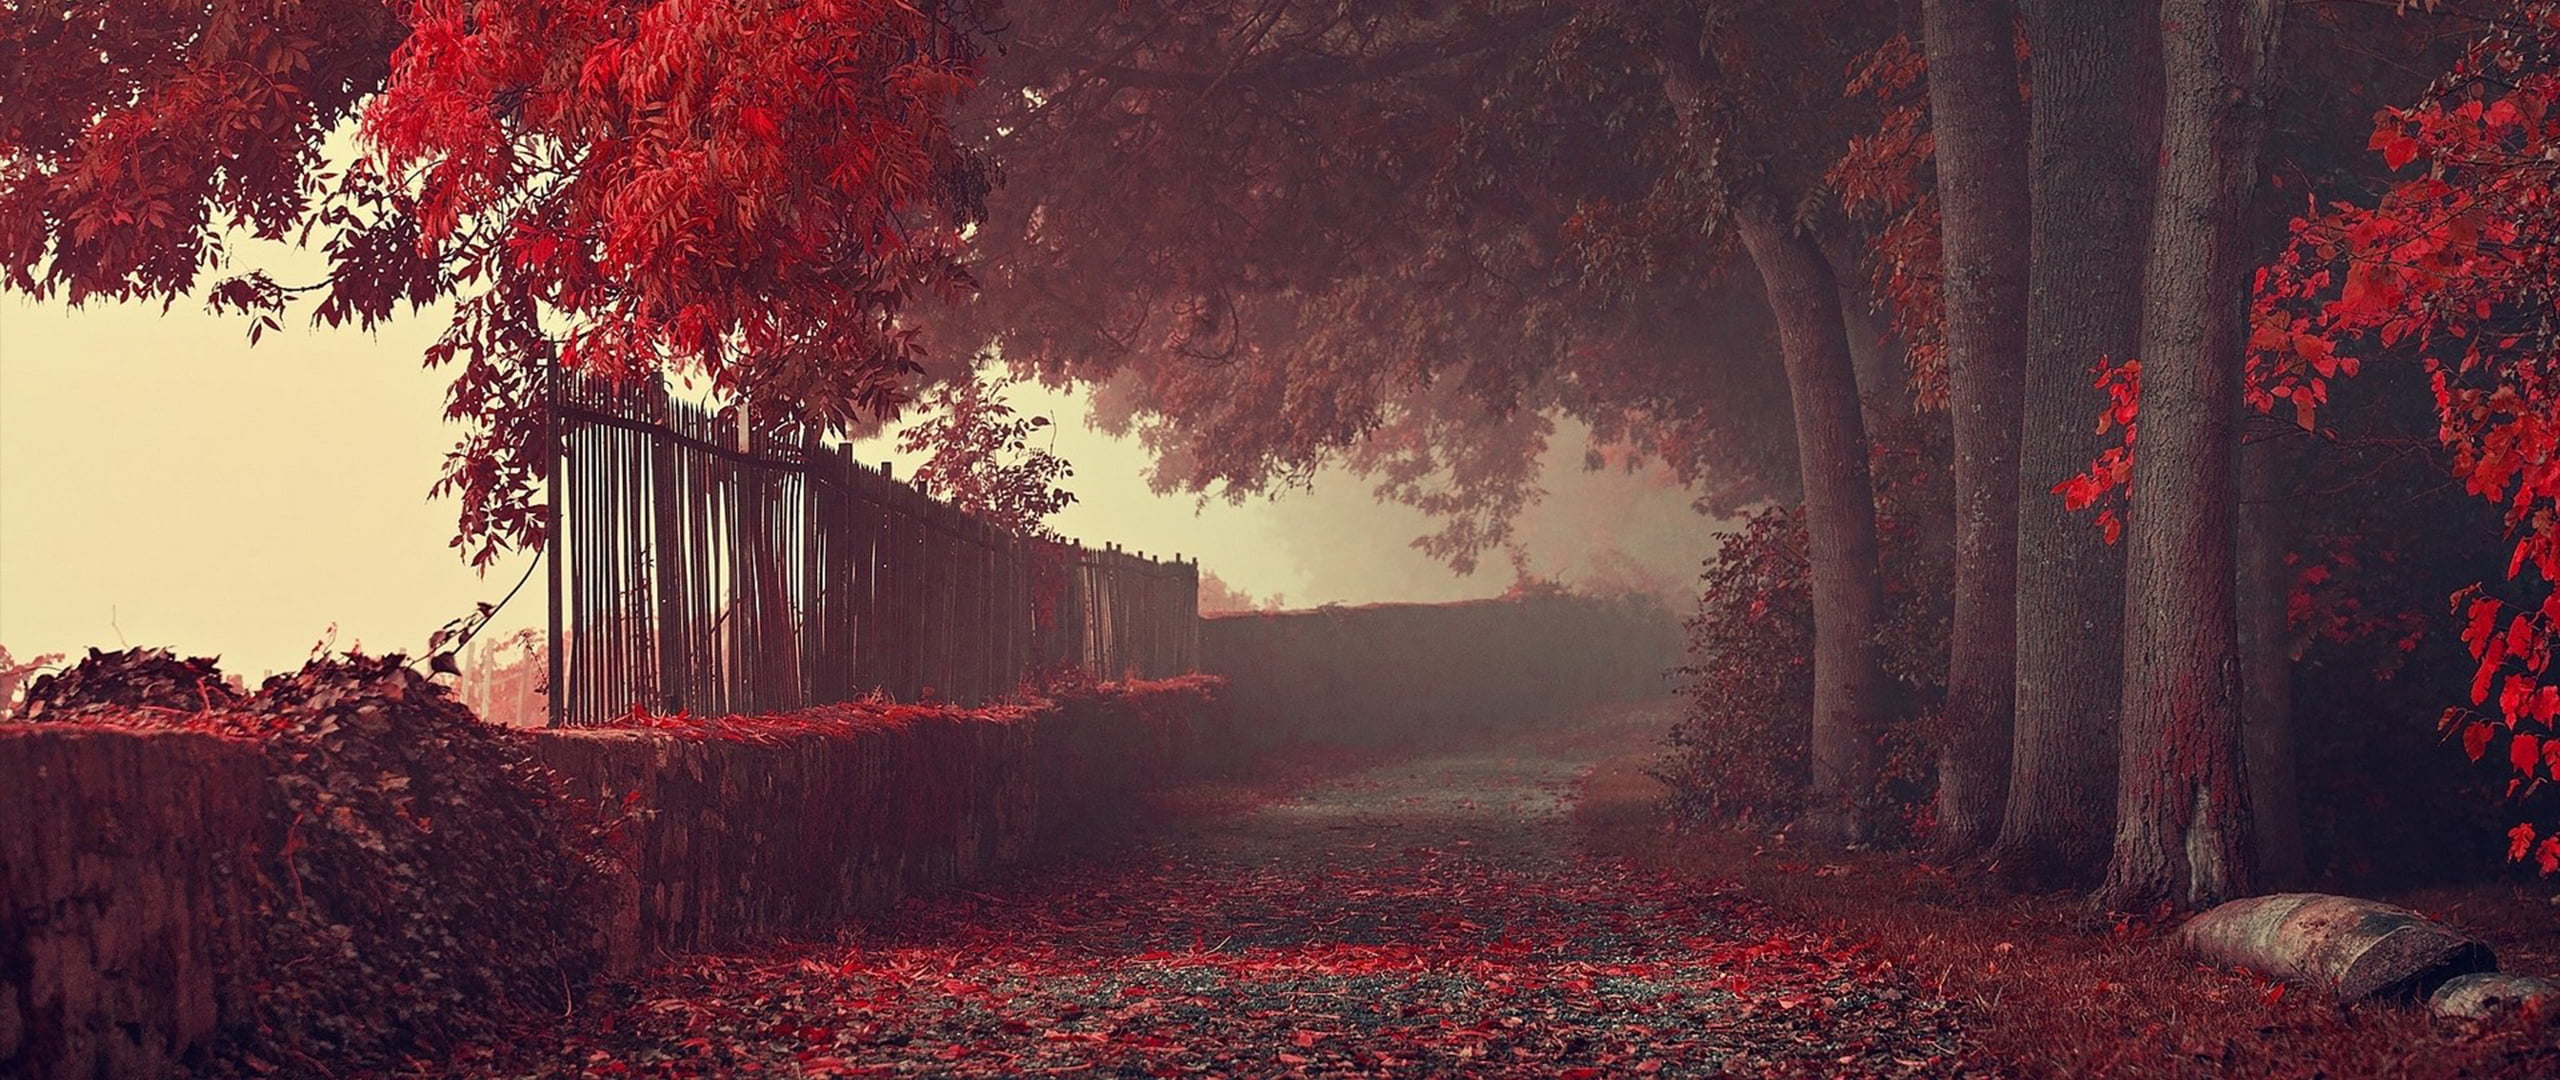 red trees, ultra-wide, photography, nature, leaves, fall, path